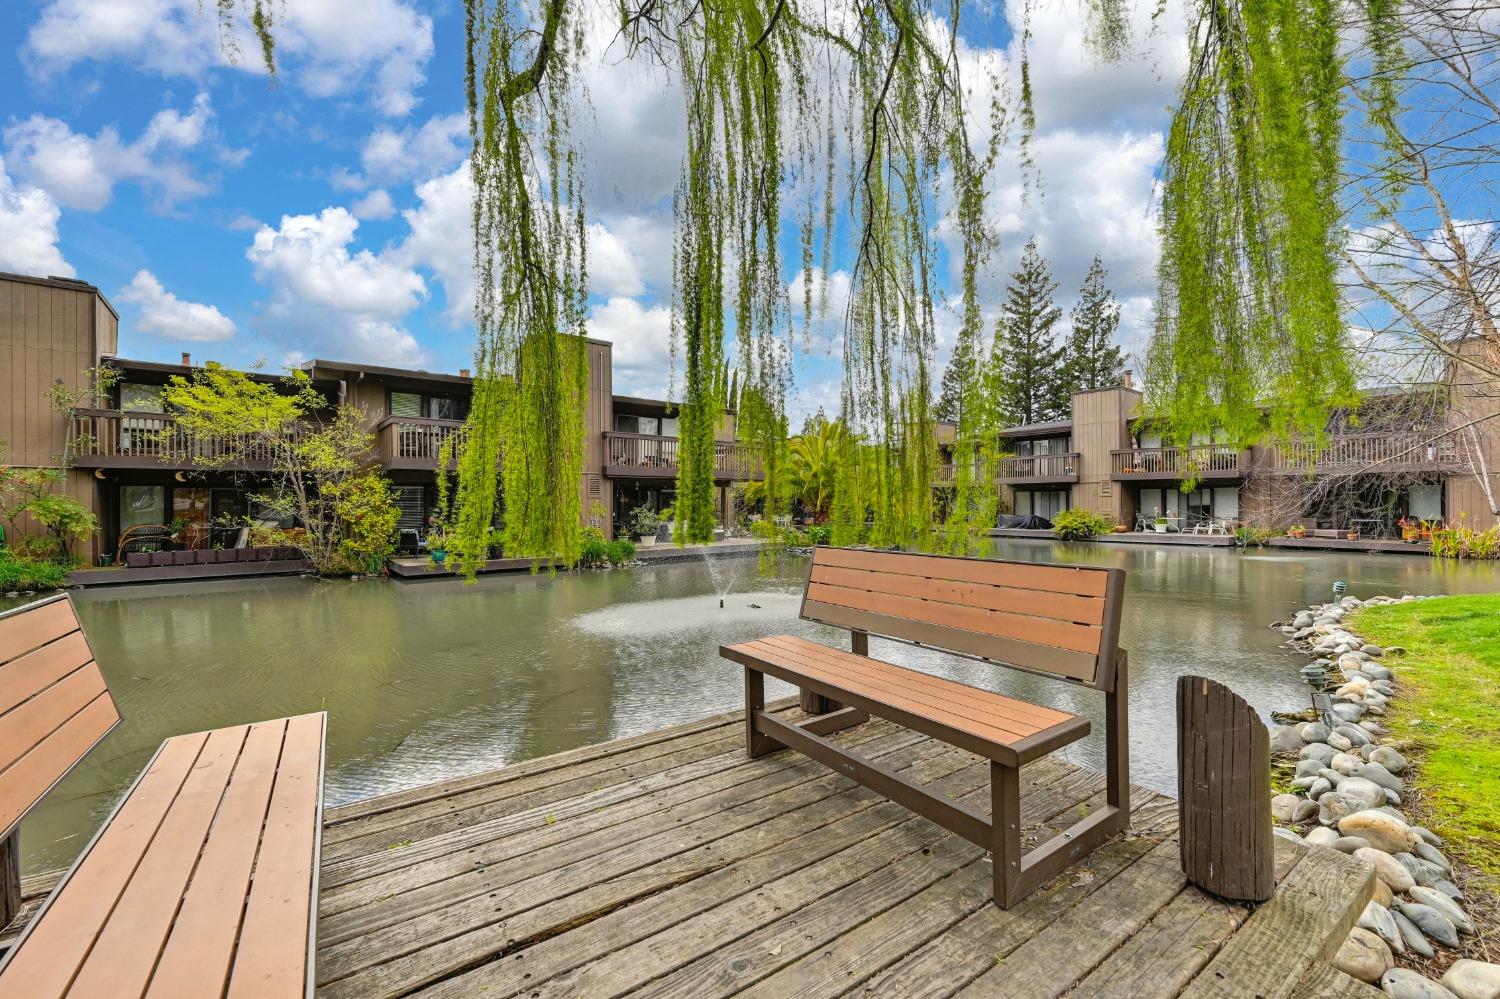 Condos, Lofts and Townhomes for Sale in Sacramento Condo Buyers Guide